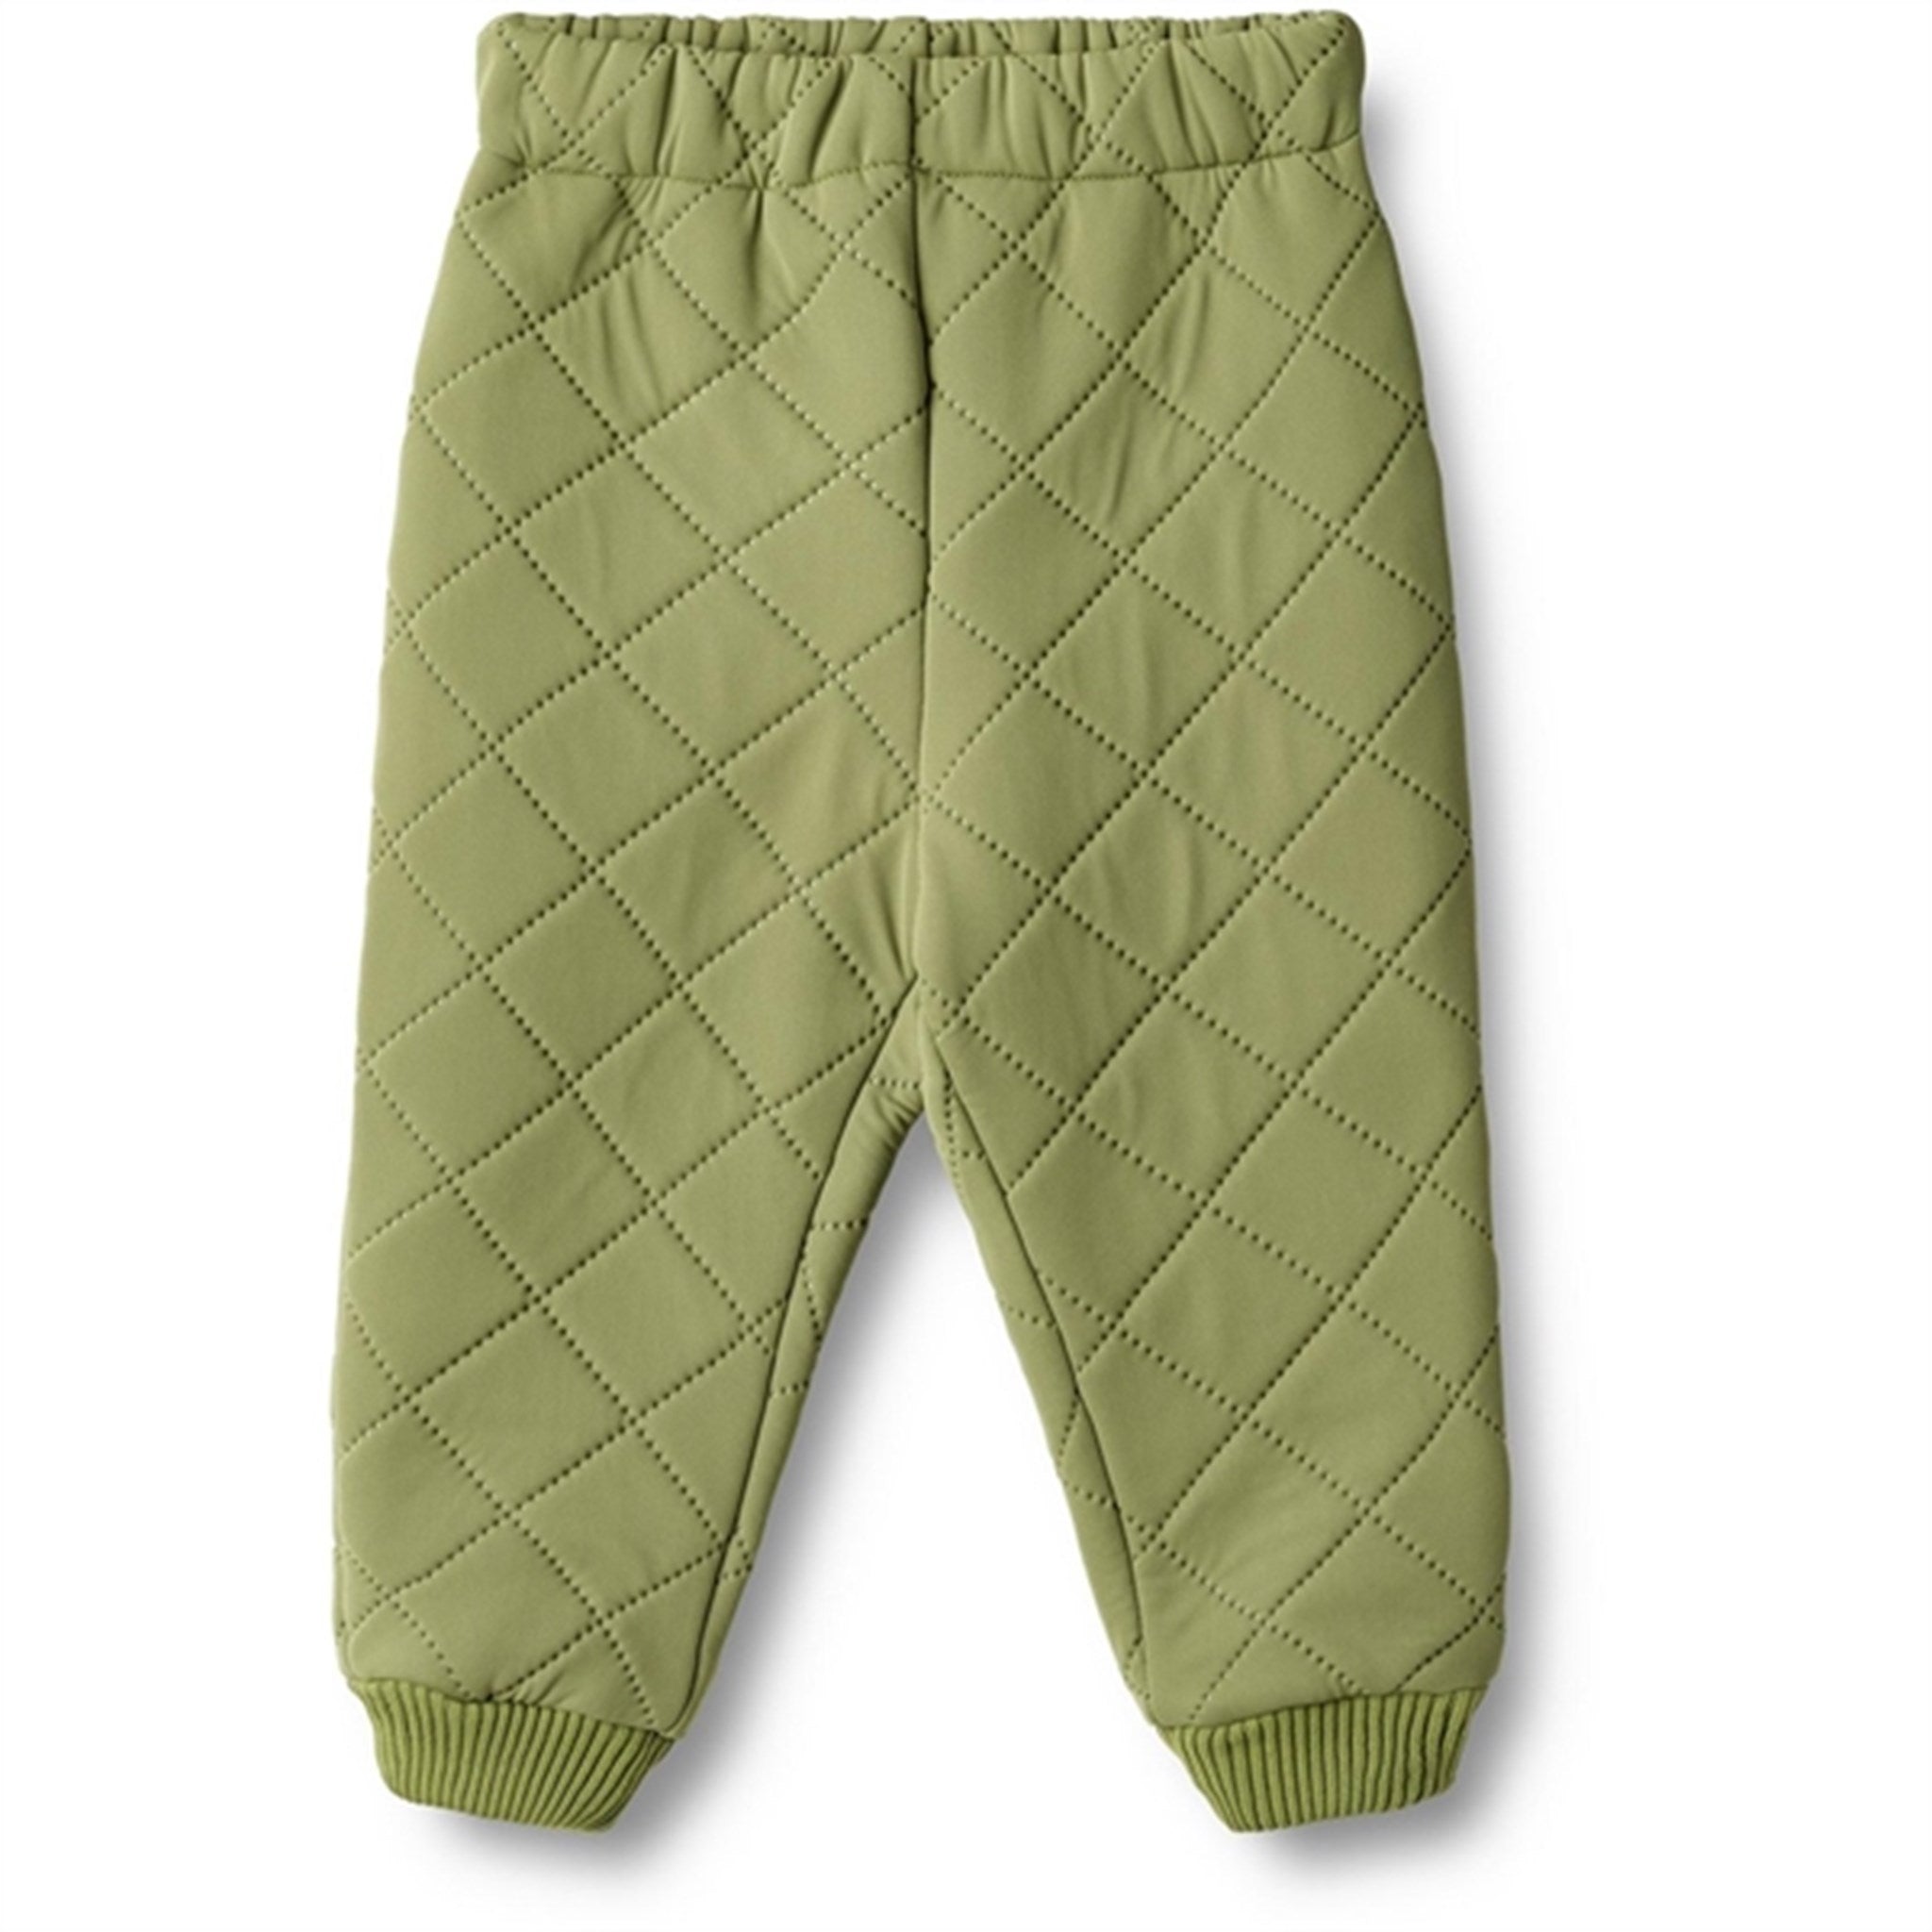 Wheat Thermo Chive Pants Alex